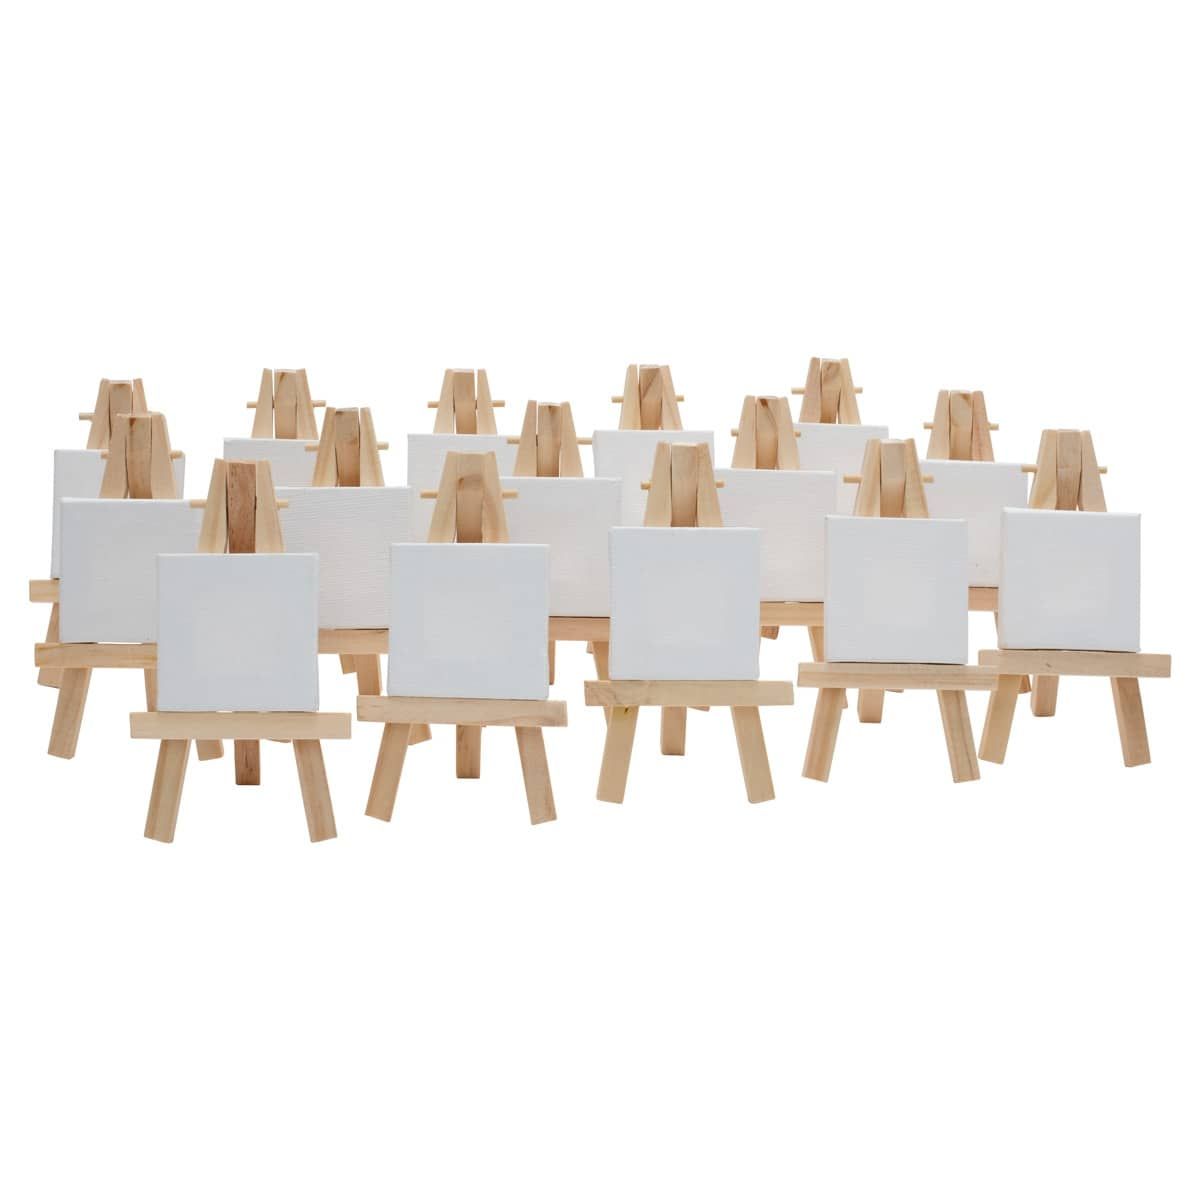 Ultra Mini Stretched Canvas And Easels By Creative Mark Bonus